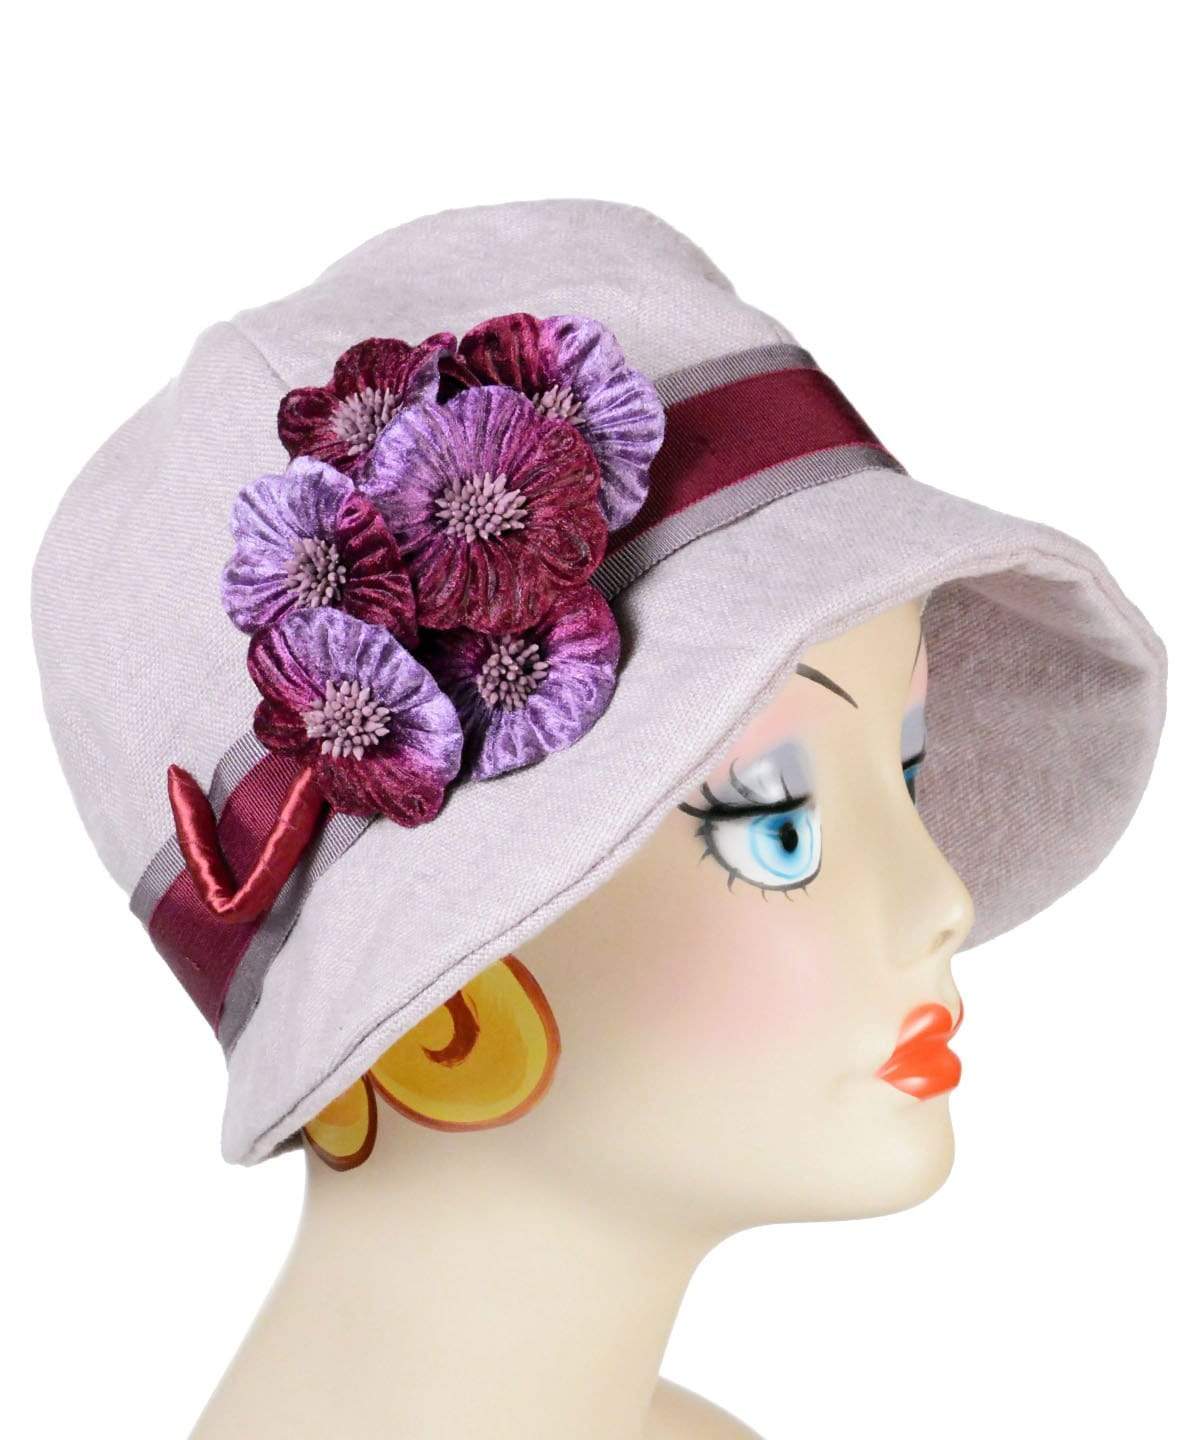  Grace Cloche Style Hat Linen in Rose  Quartz with Velvet Blossom Brooch | By Pandemonium Millinery | Seattle WA USA